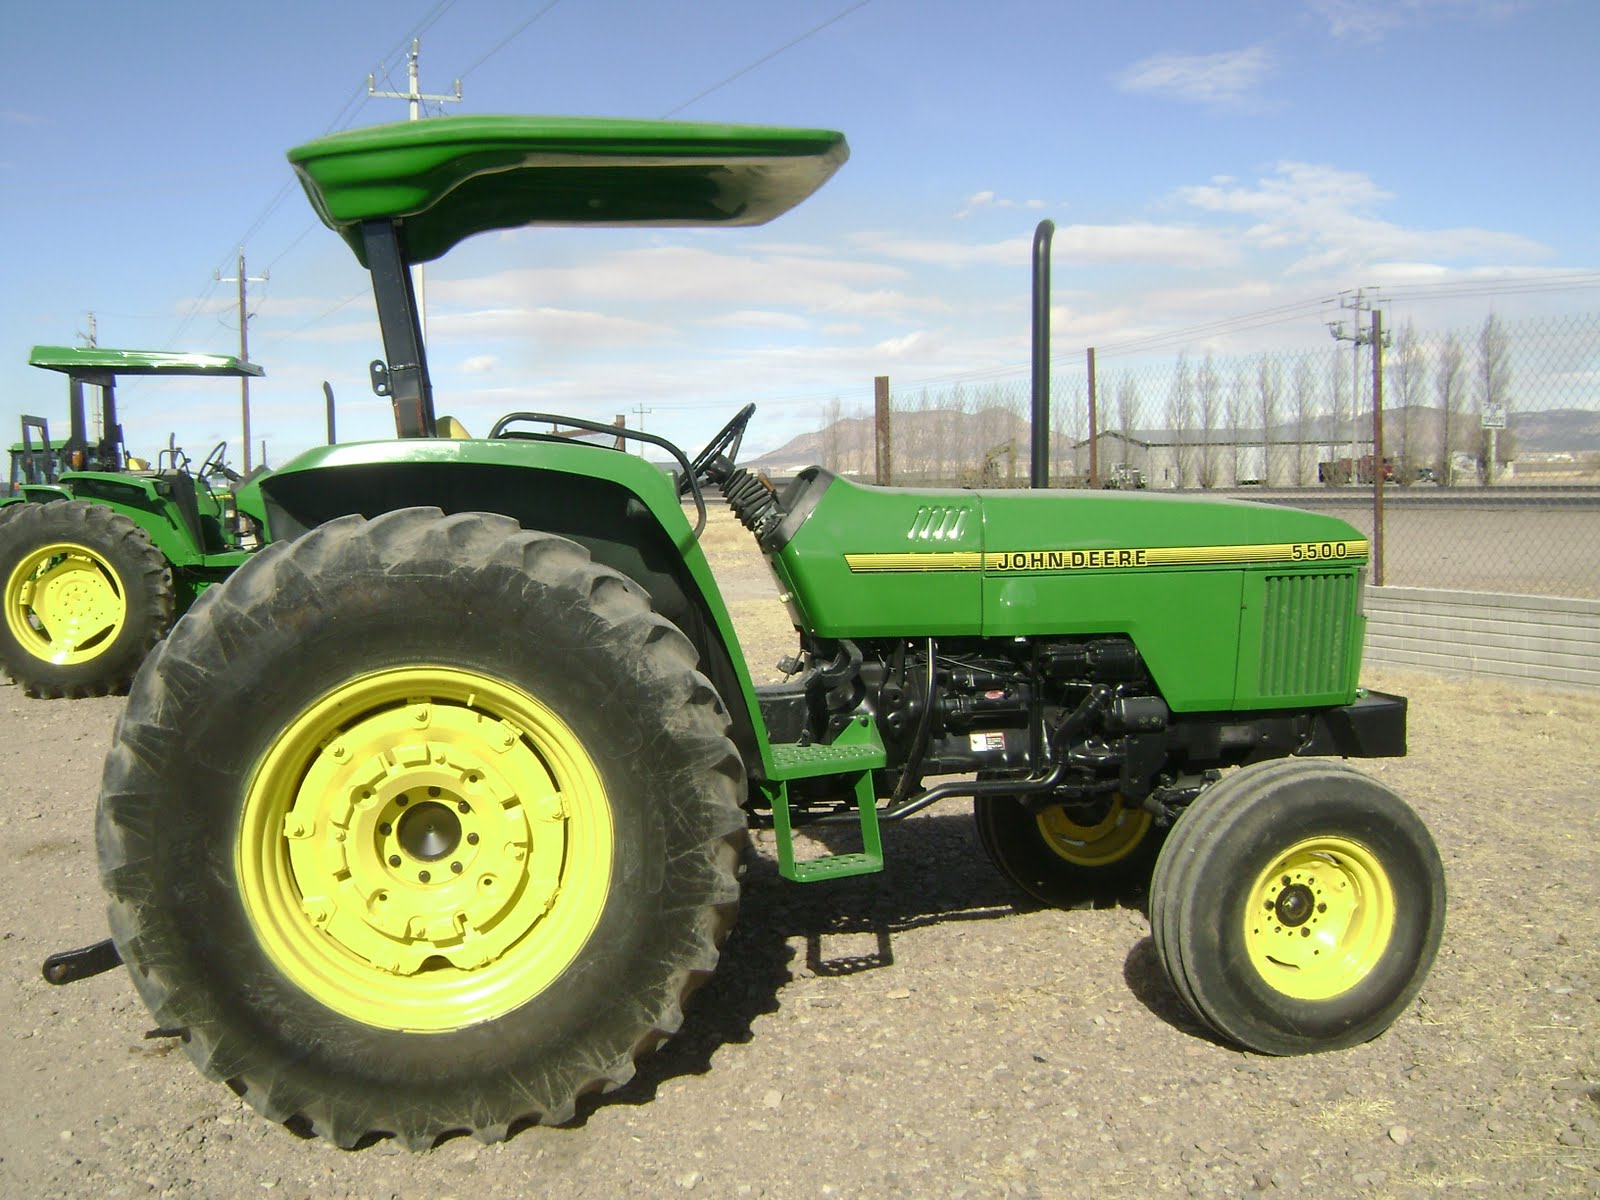 John Deere 5500 Tractor submited images.